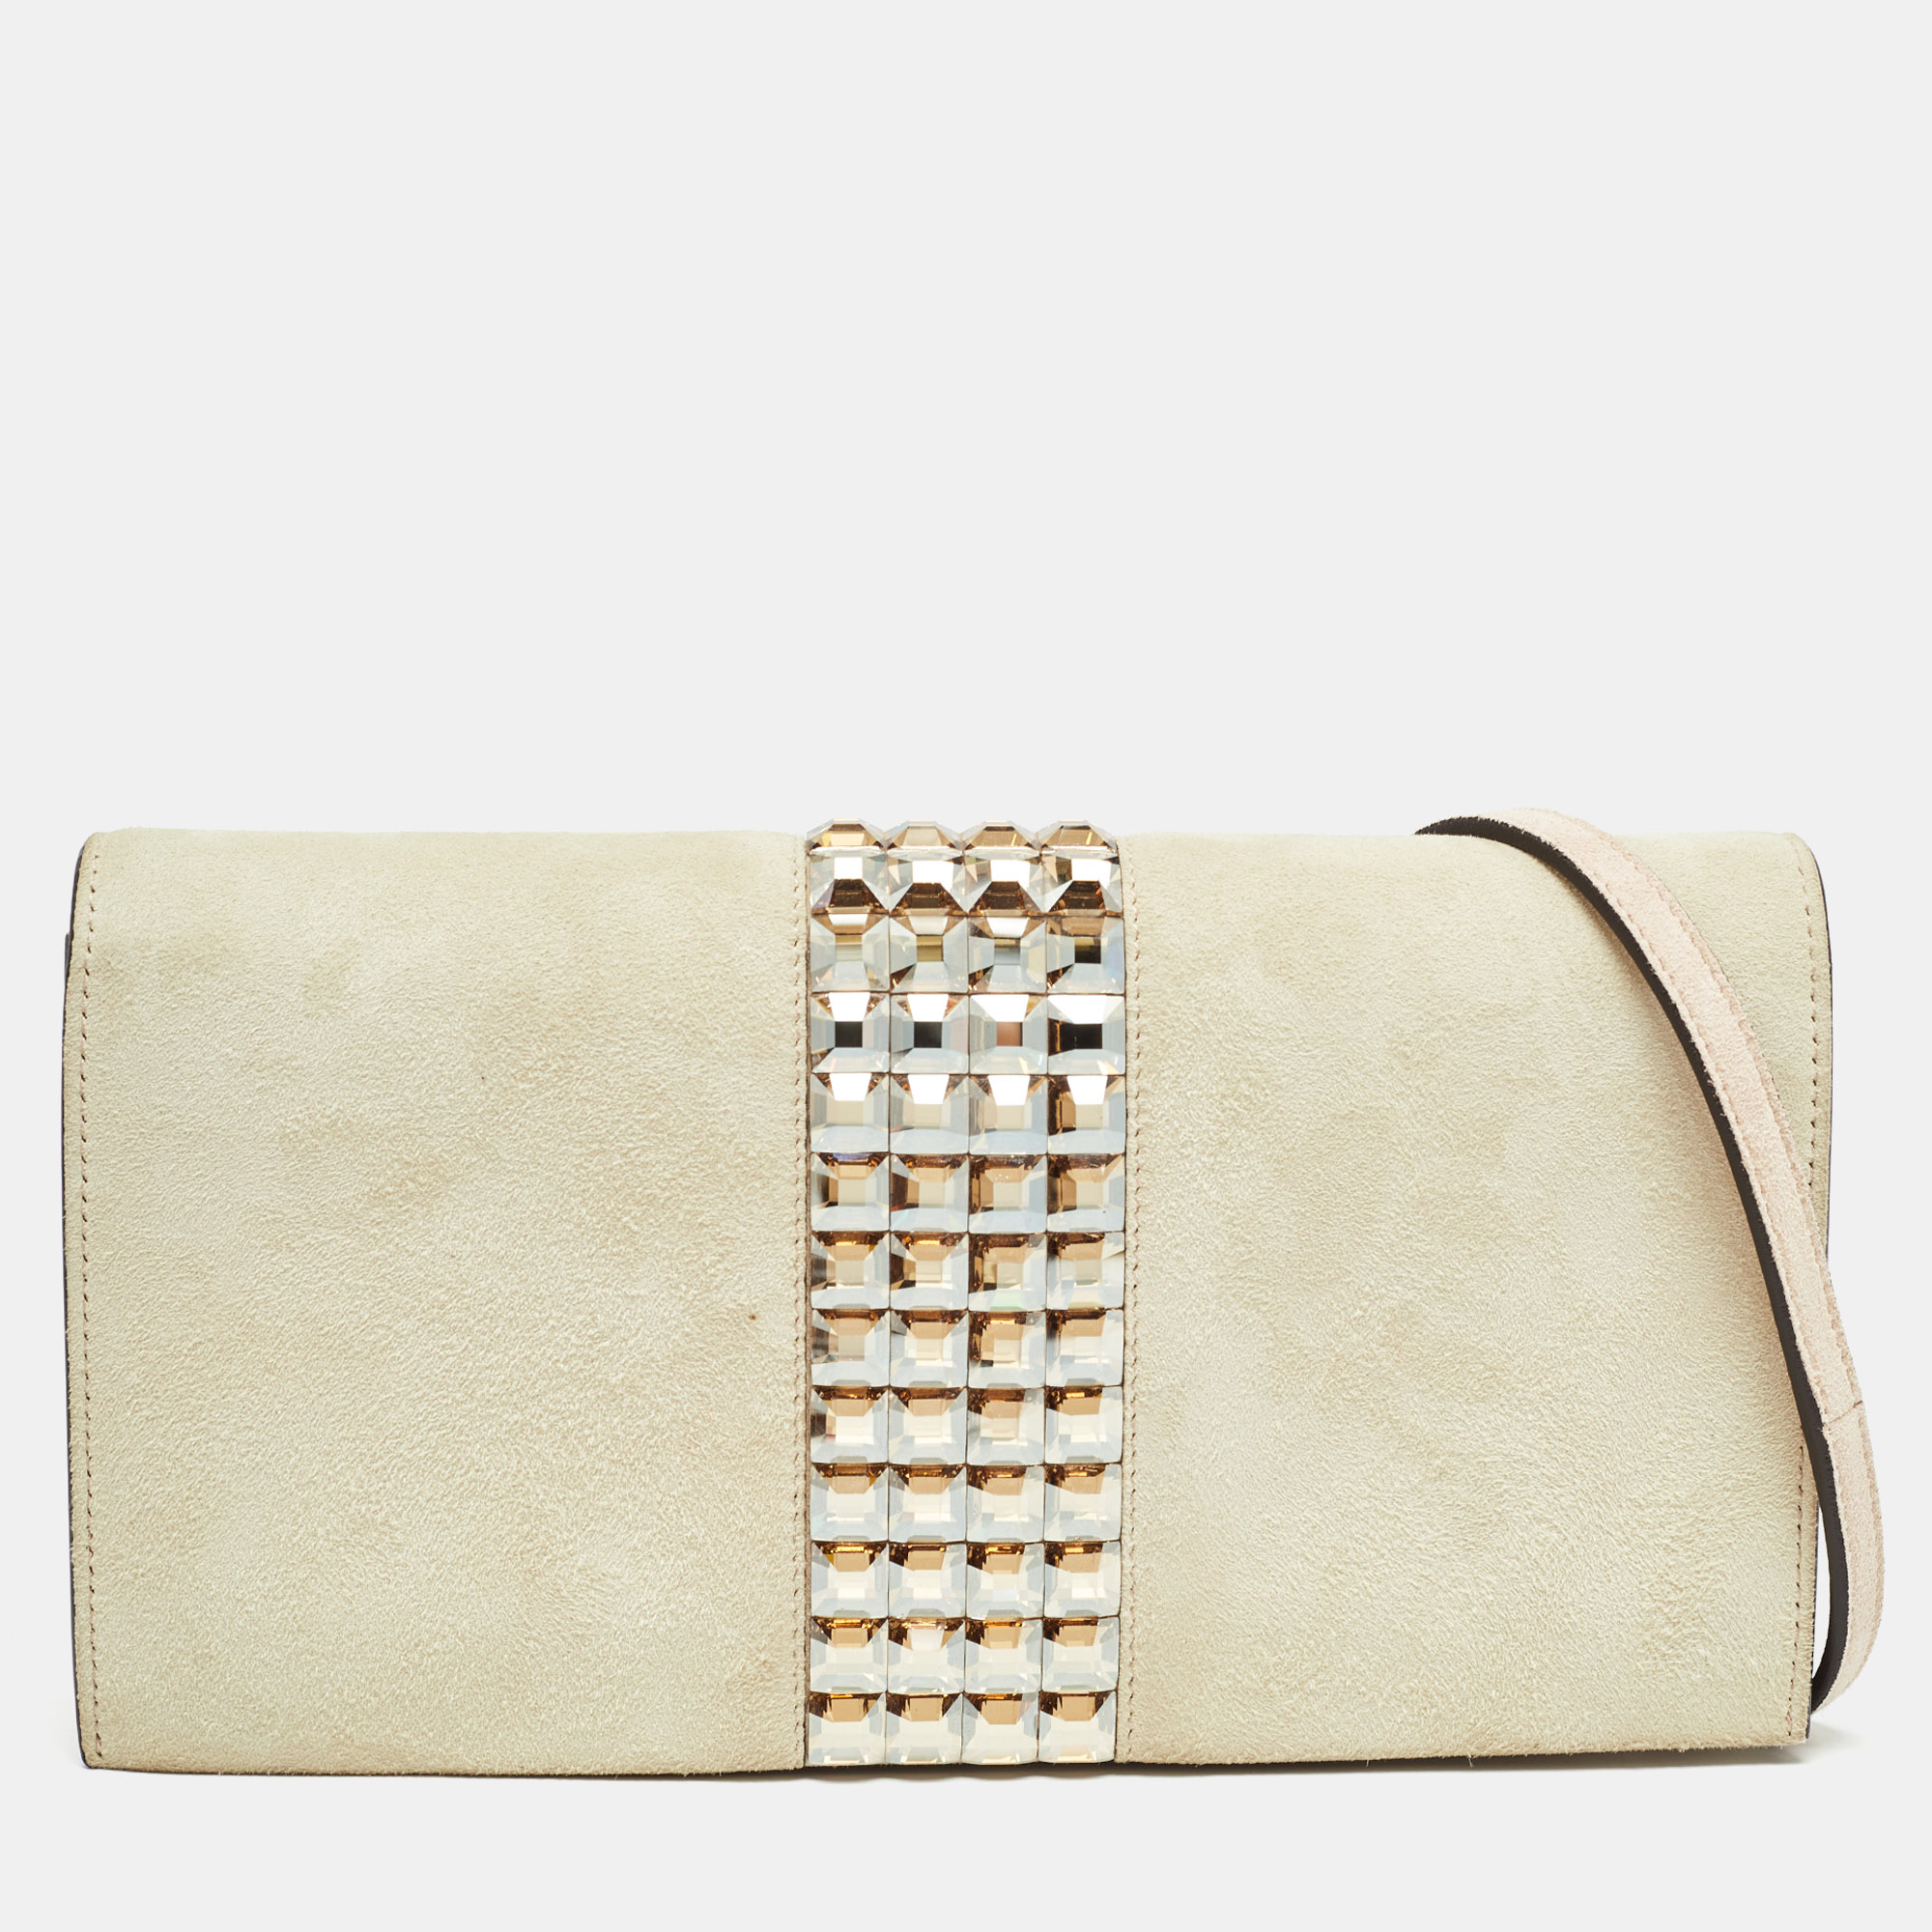 Gucci beige suede crystals embellished flap chain clutch